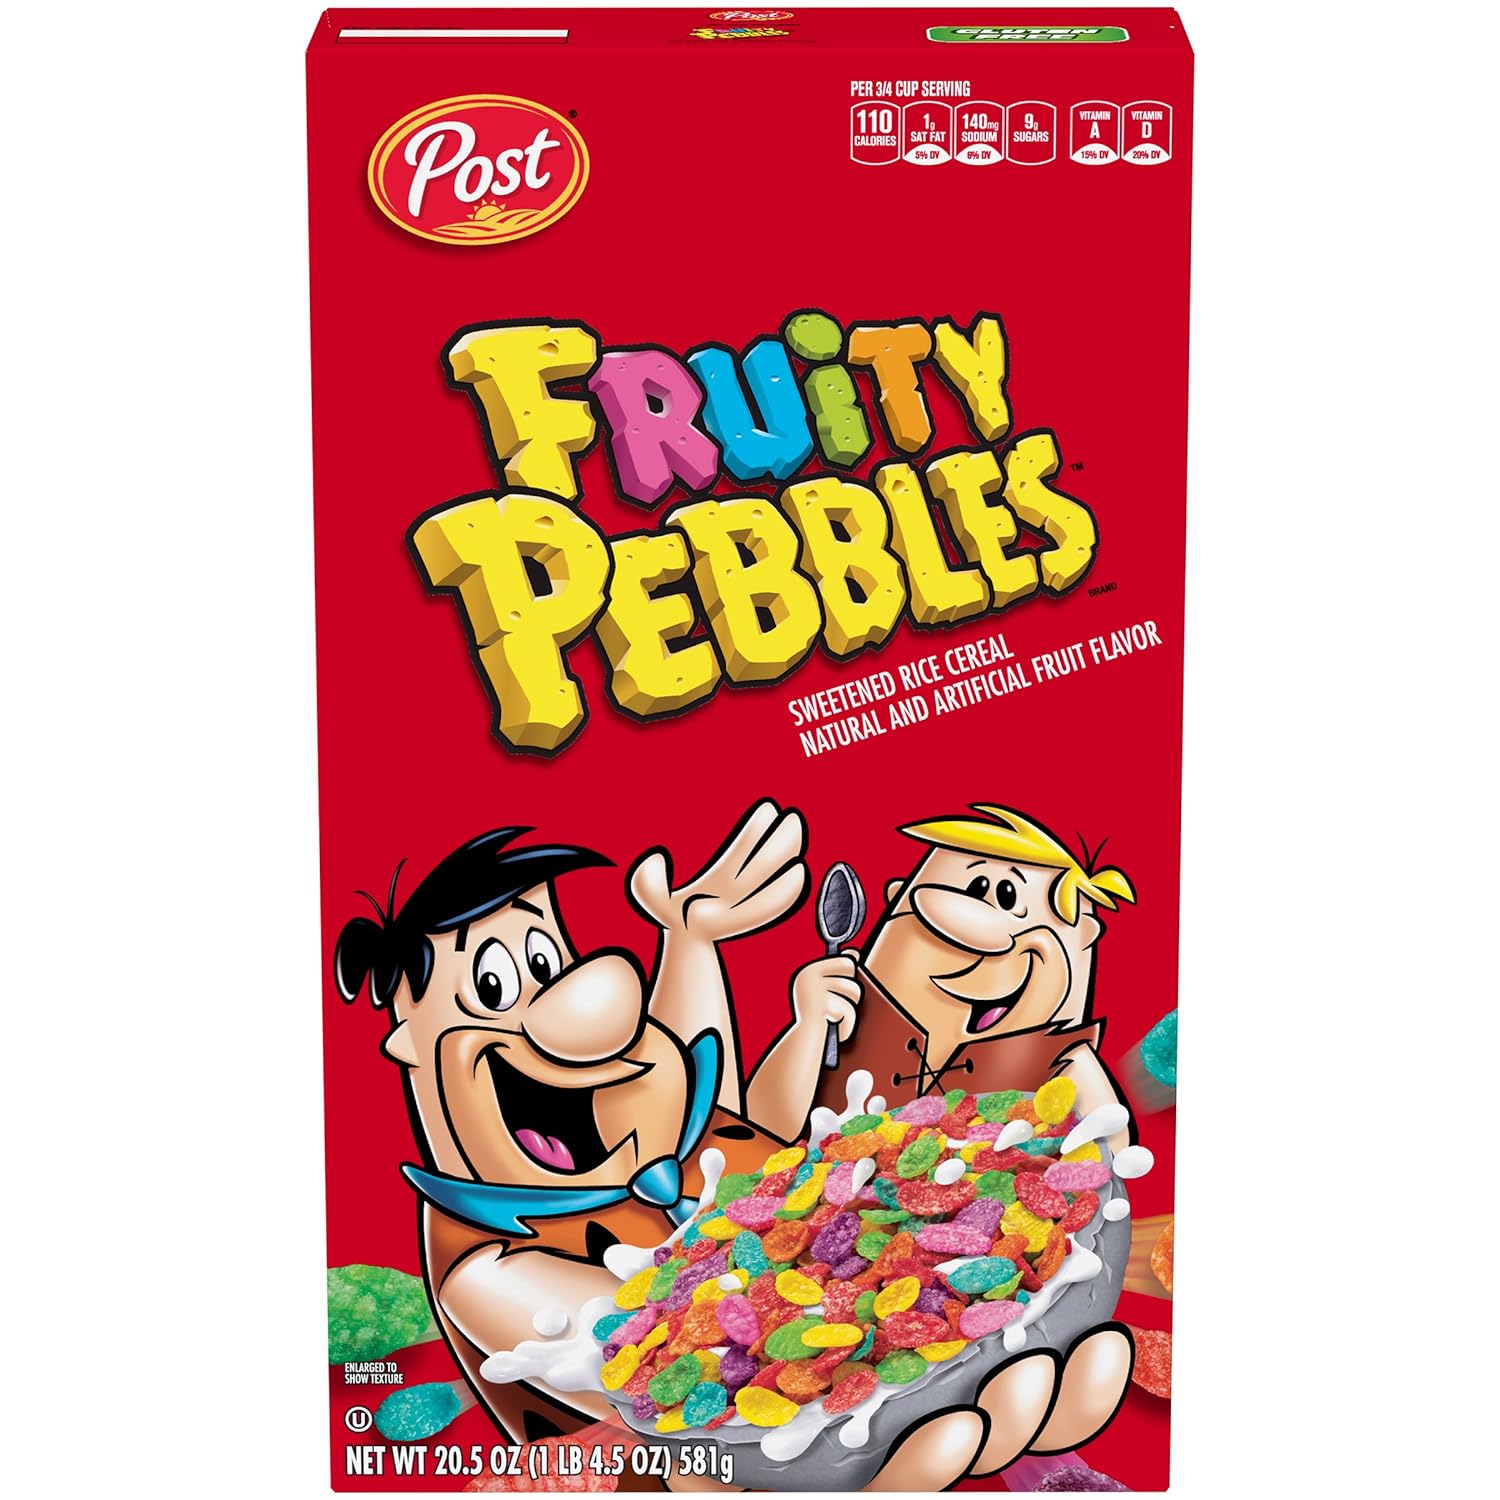 Post Fruity Pebbles Cereal 20.5 oz. Box